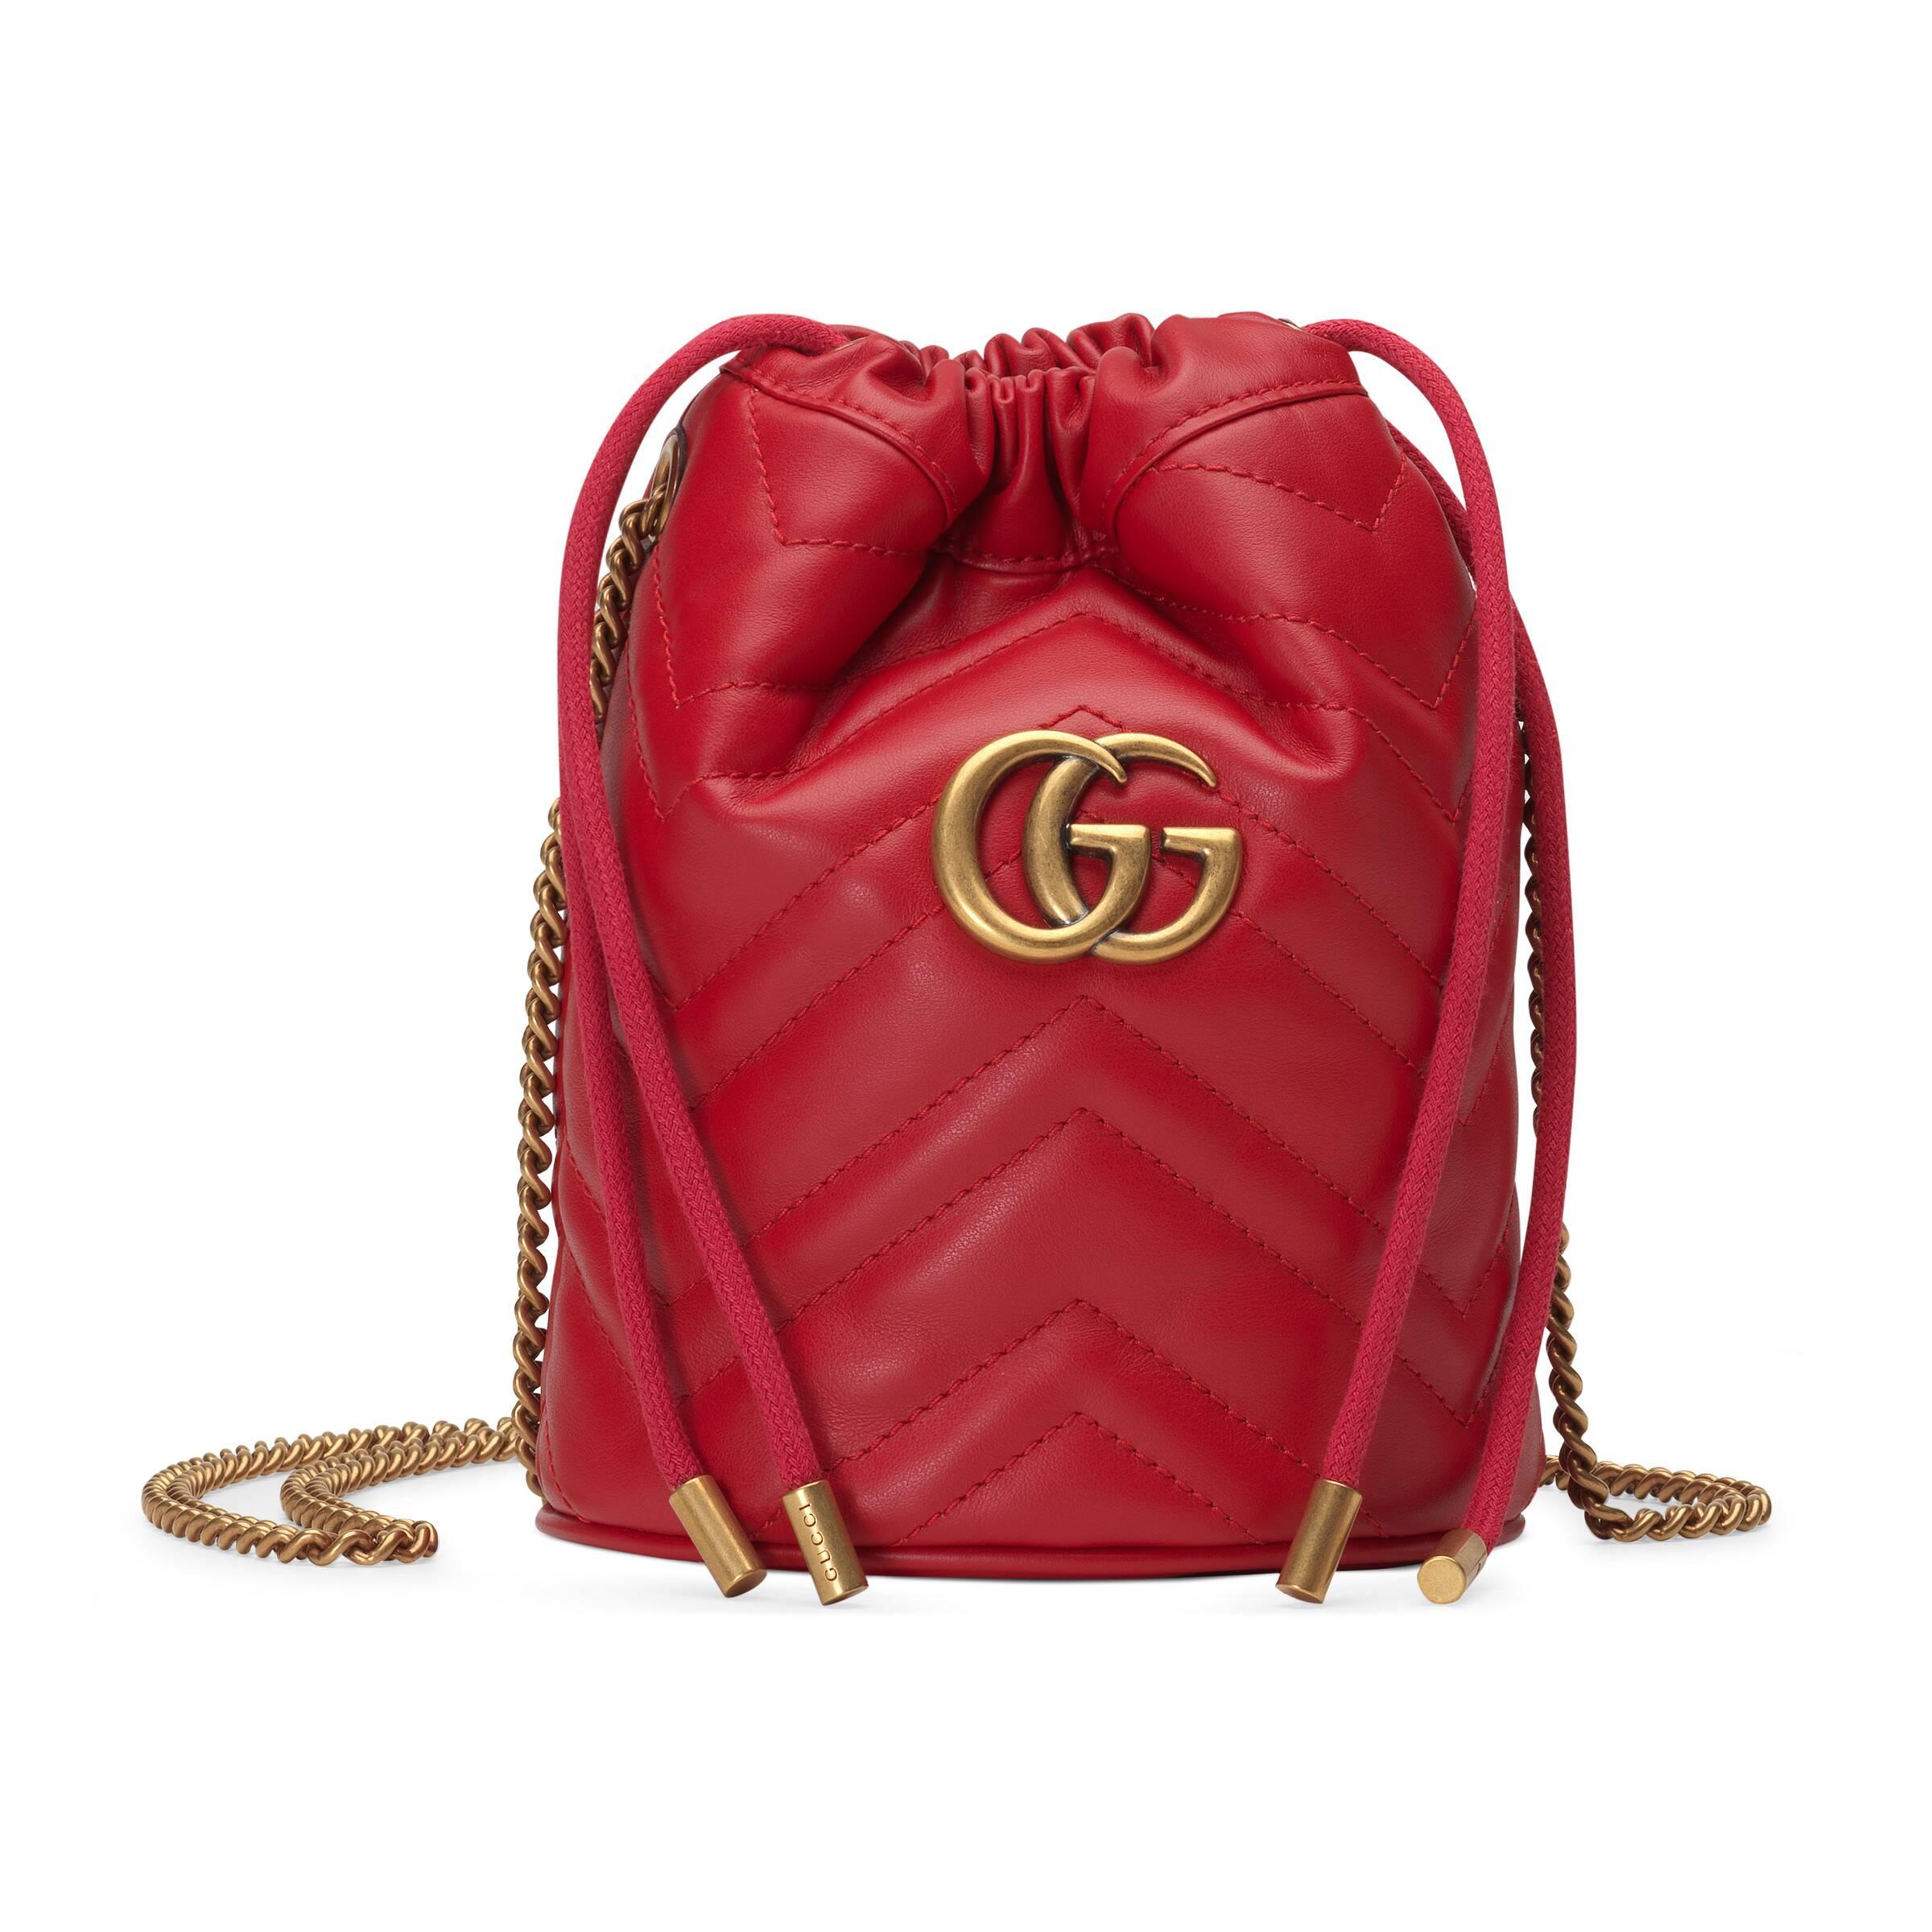 Gg Marmont Mini Bucket Bag Review Sale Websites, 48% OFF |  connect-summary.com